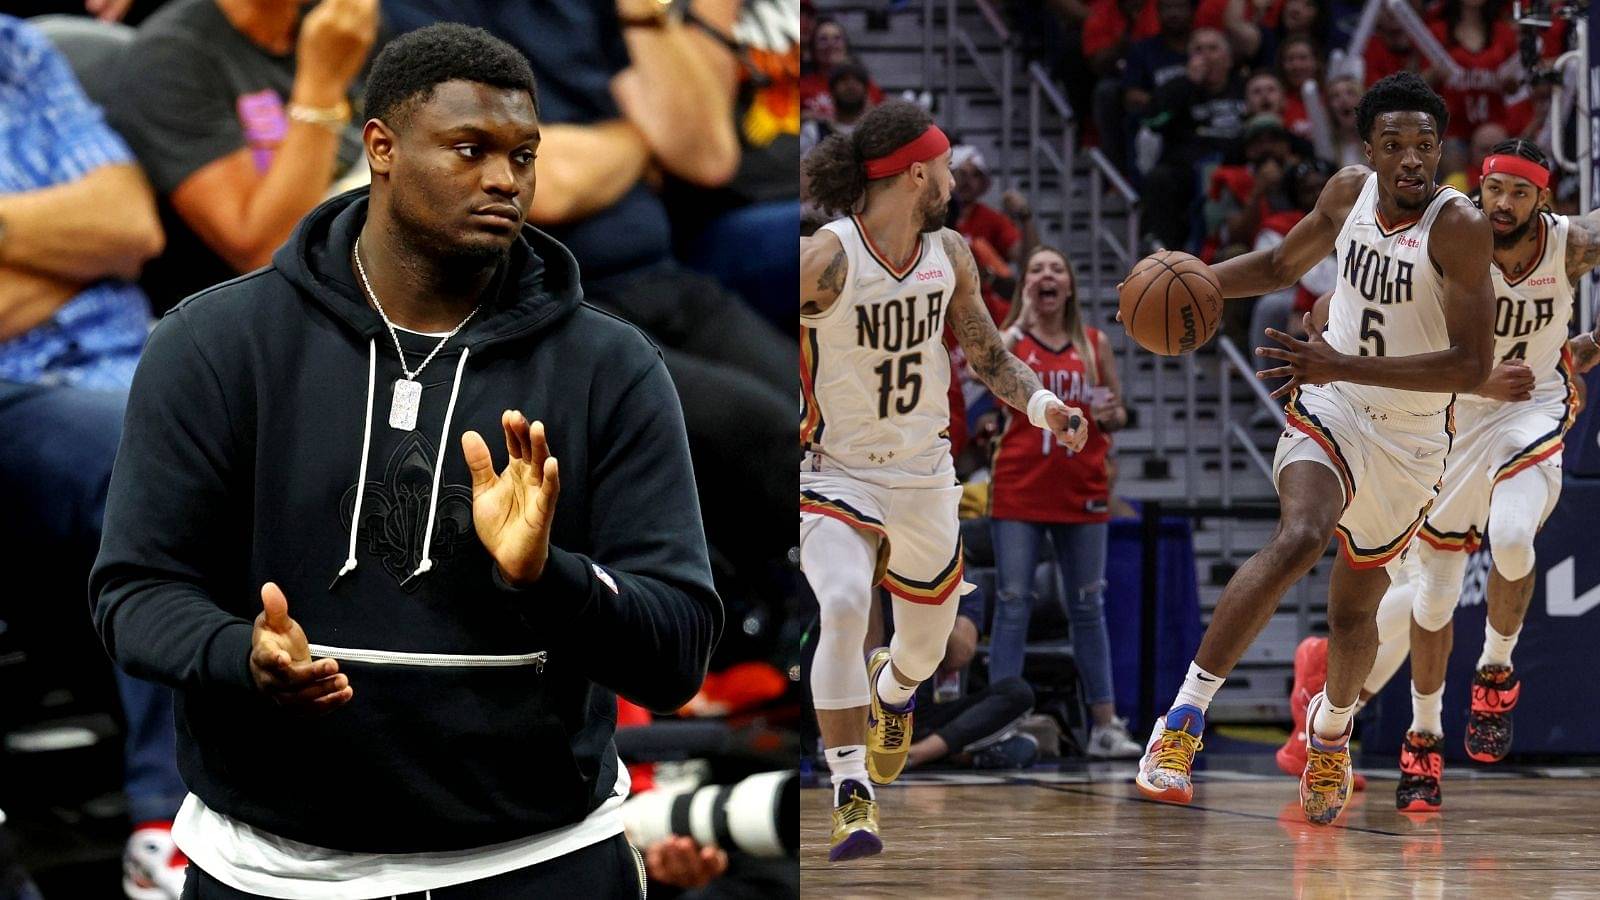 "Zion Williamson has to look himself in the mirror": Charles Barkley blasts All-Star's attitude and fitness as the young and pesky Pelicans made life difficult for Phoenix Suns